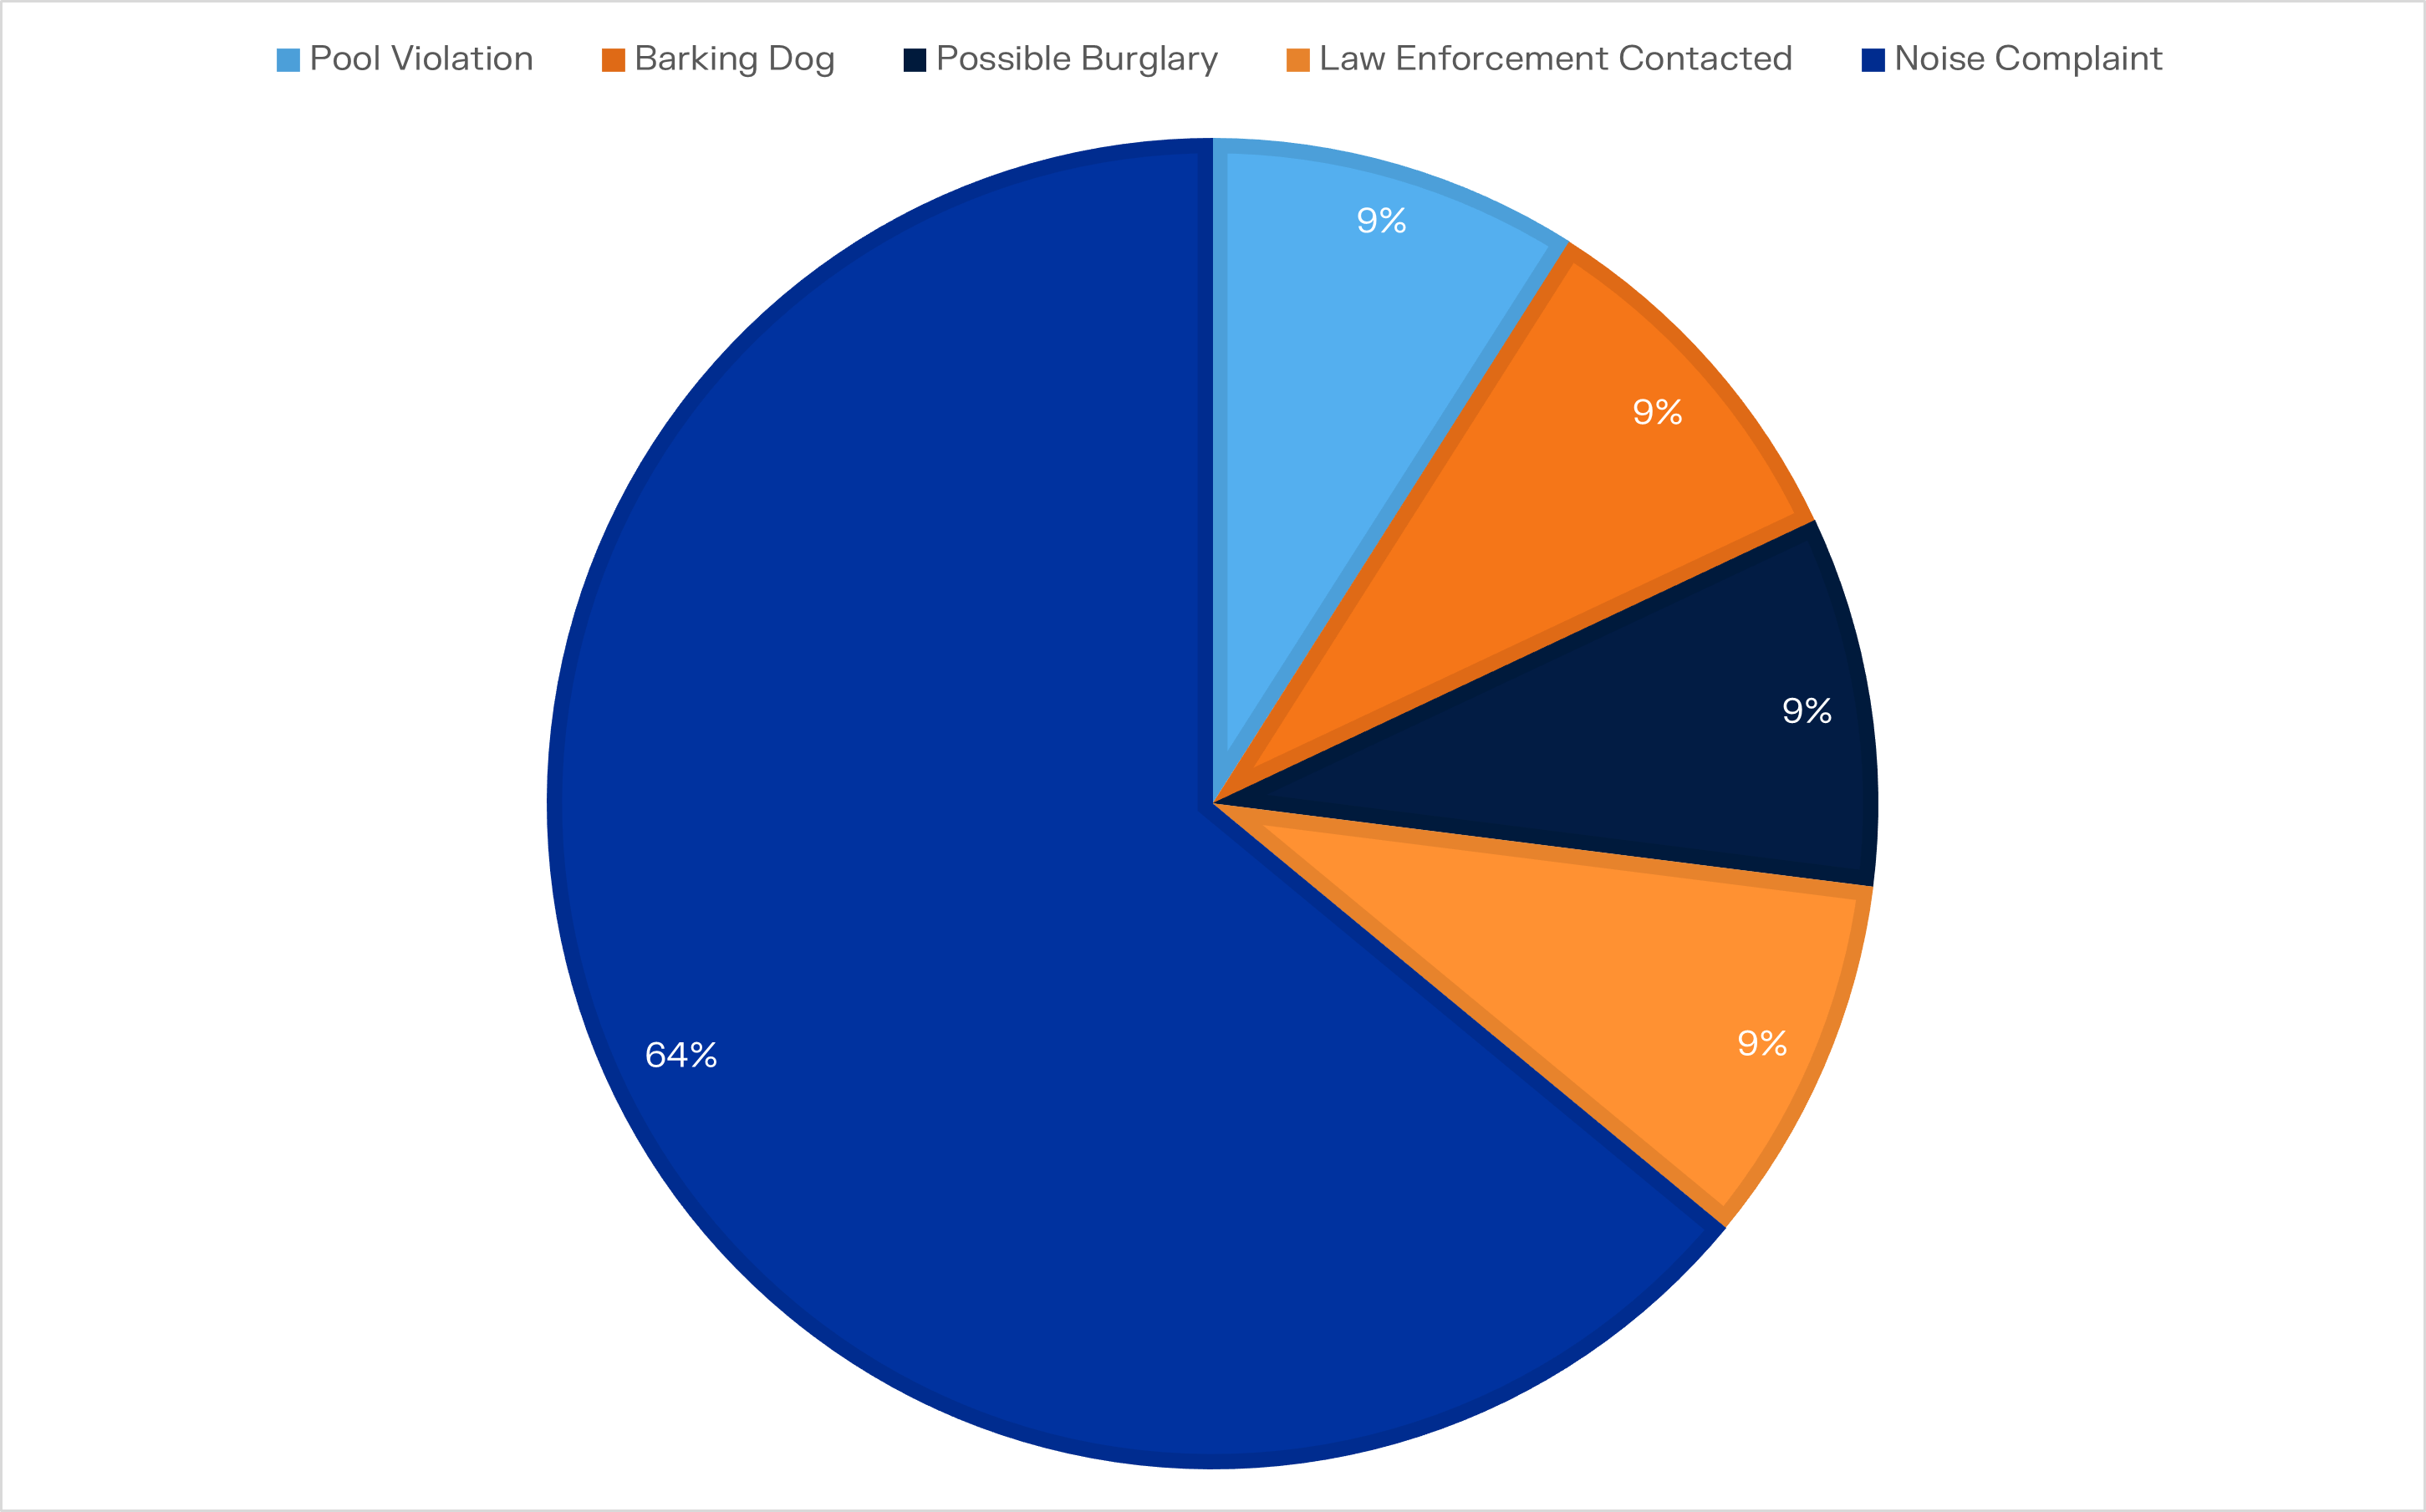 graph displaying the types of incidents the community was facing